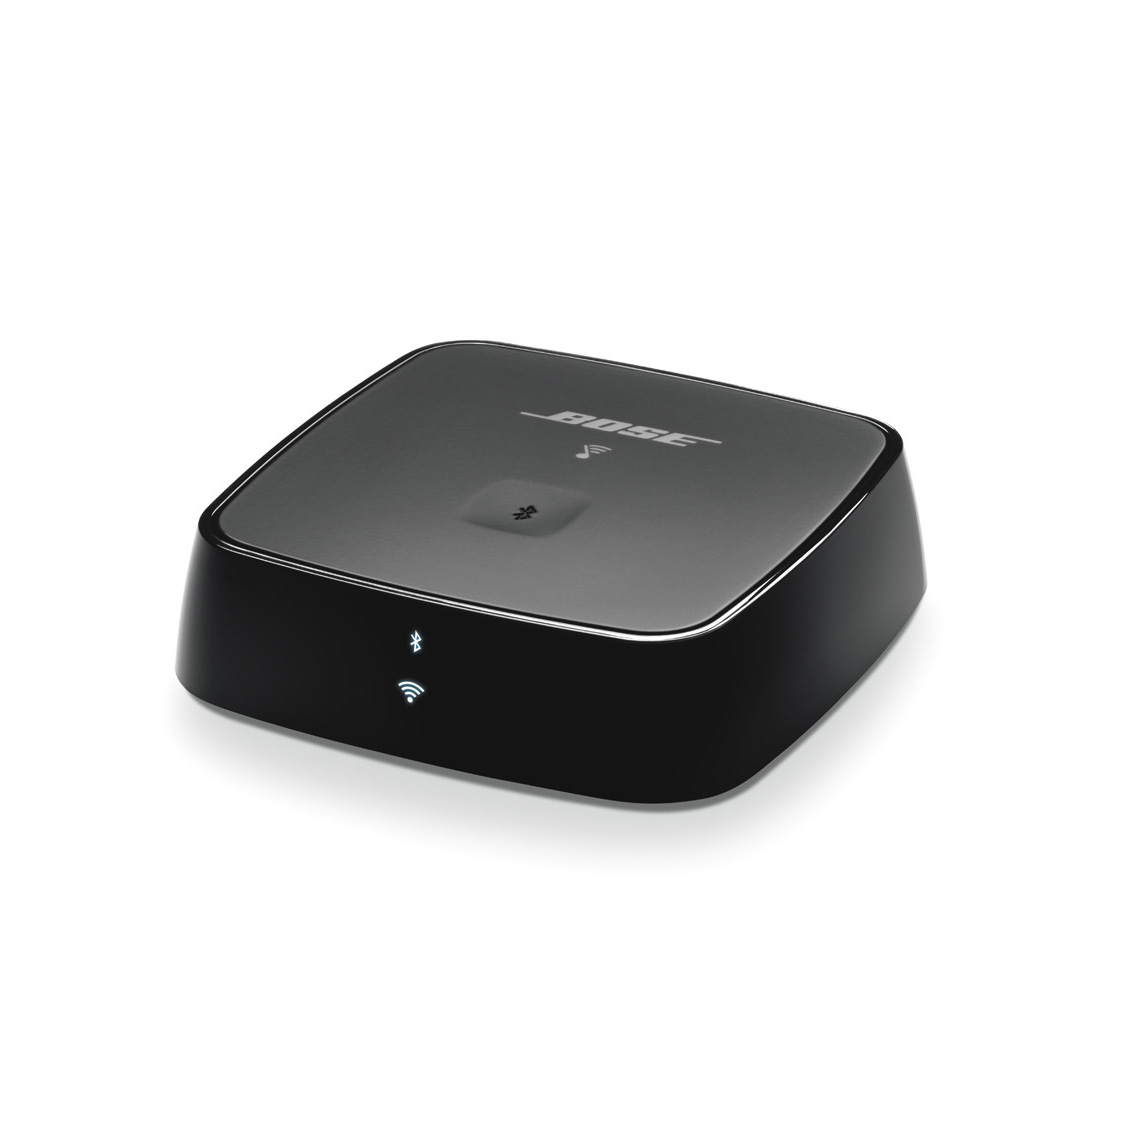 Bose SoundTouch Wireless Receiver